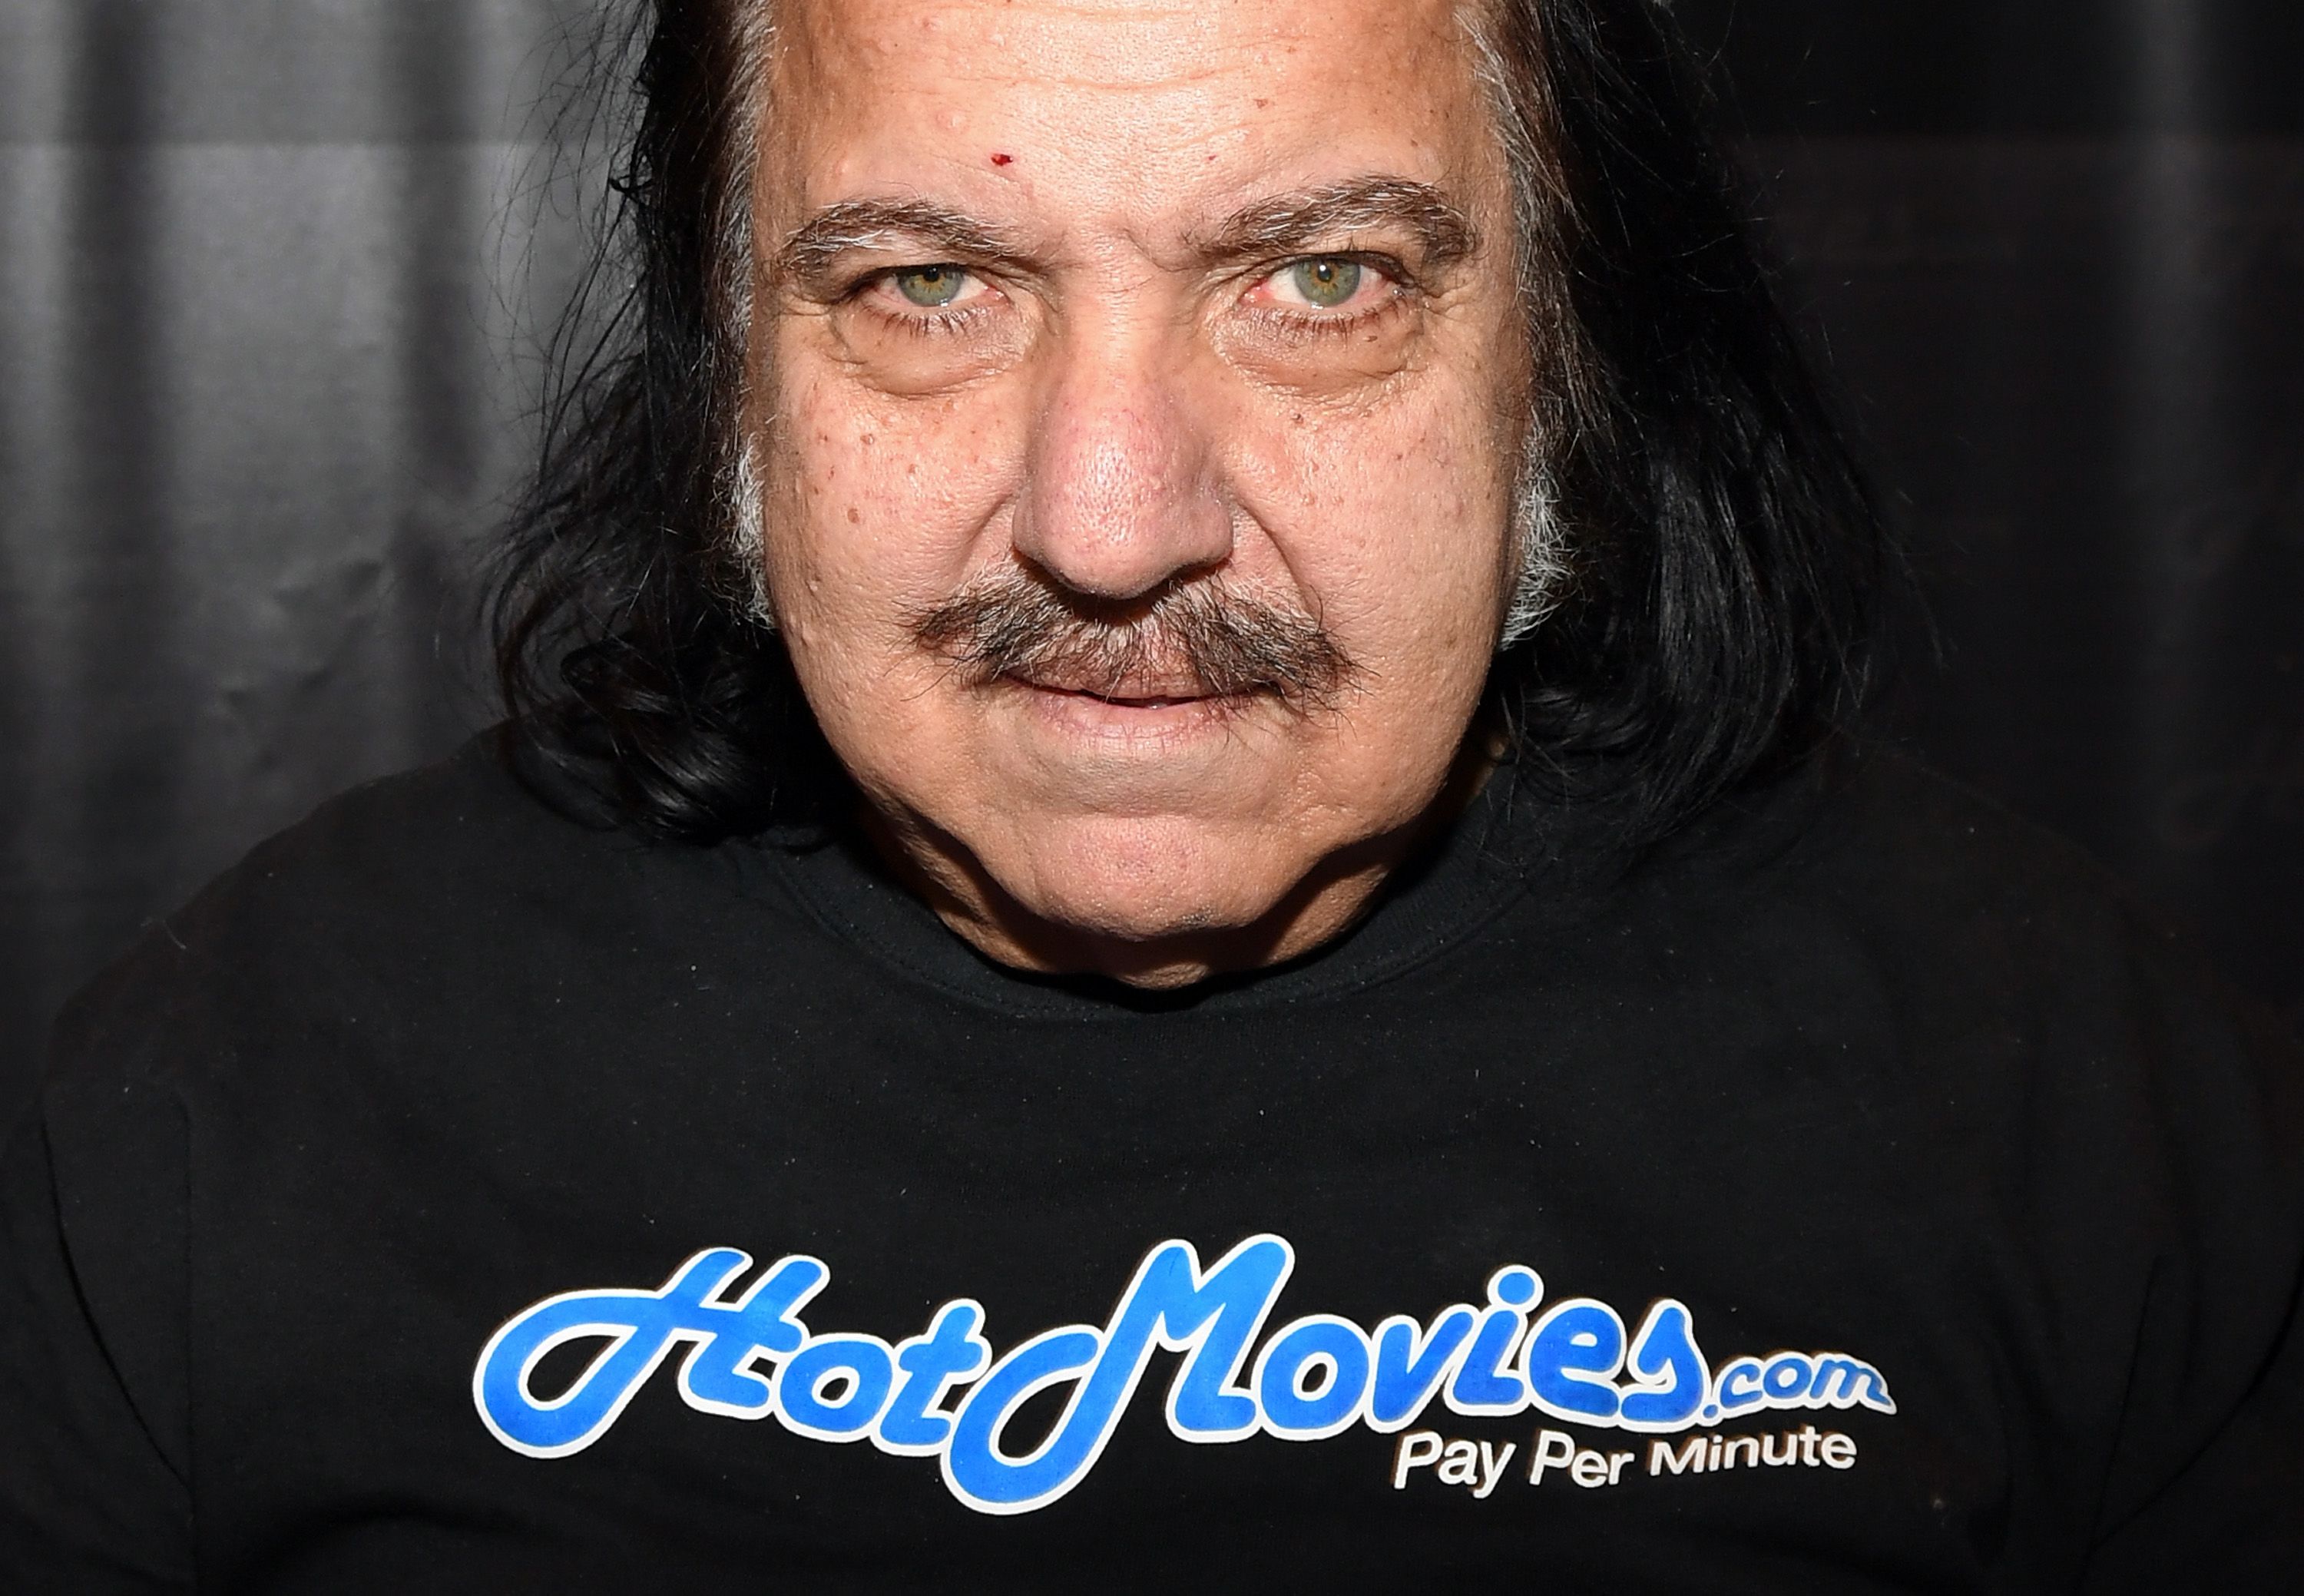 Chaina Real Balatkar Sex Pron Hd Come - Porn star Ron Jeremy faces 20 more sexual assault charges | CNN